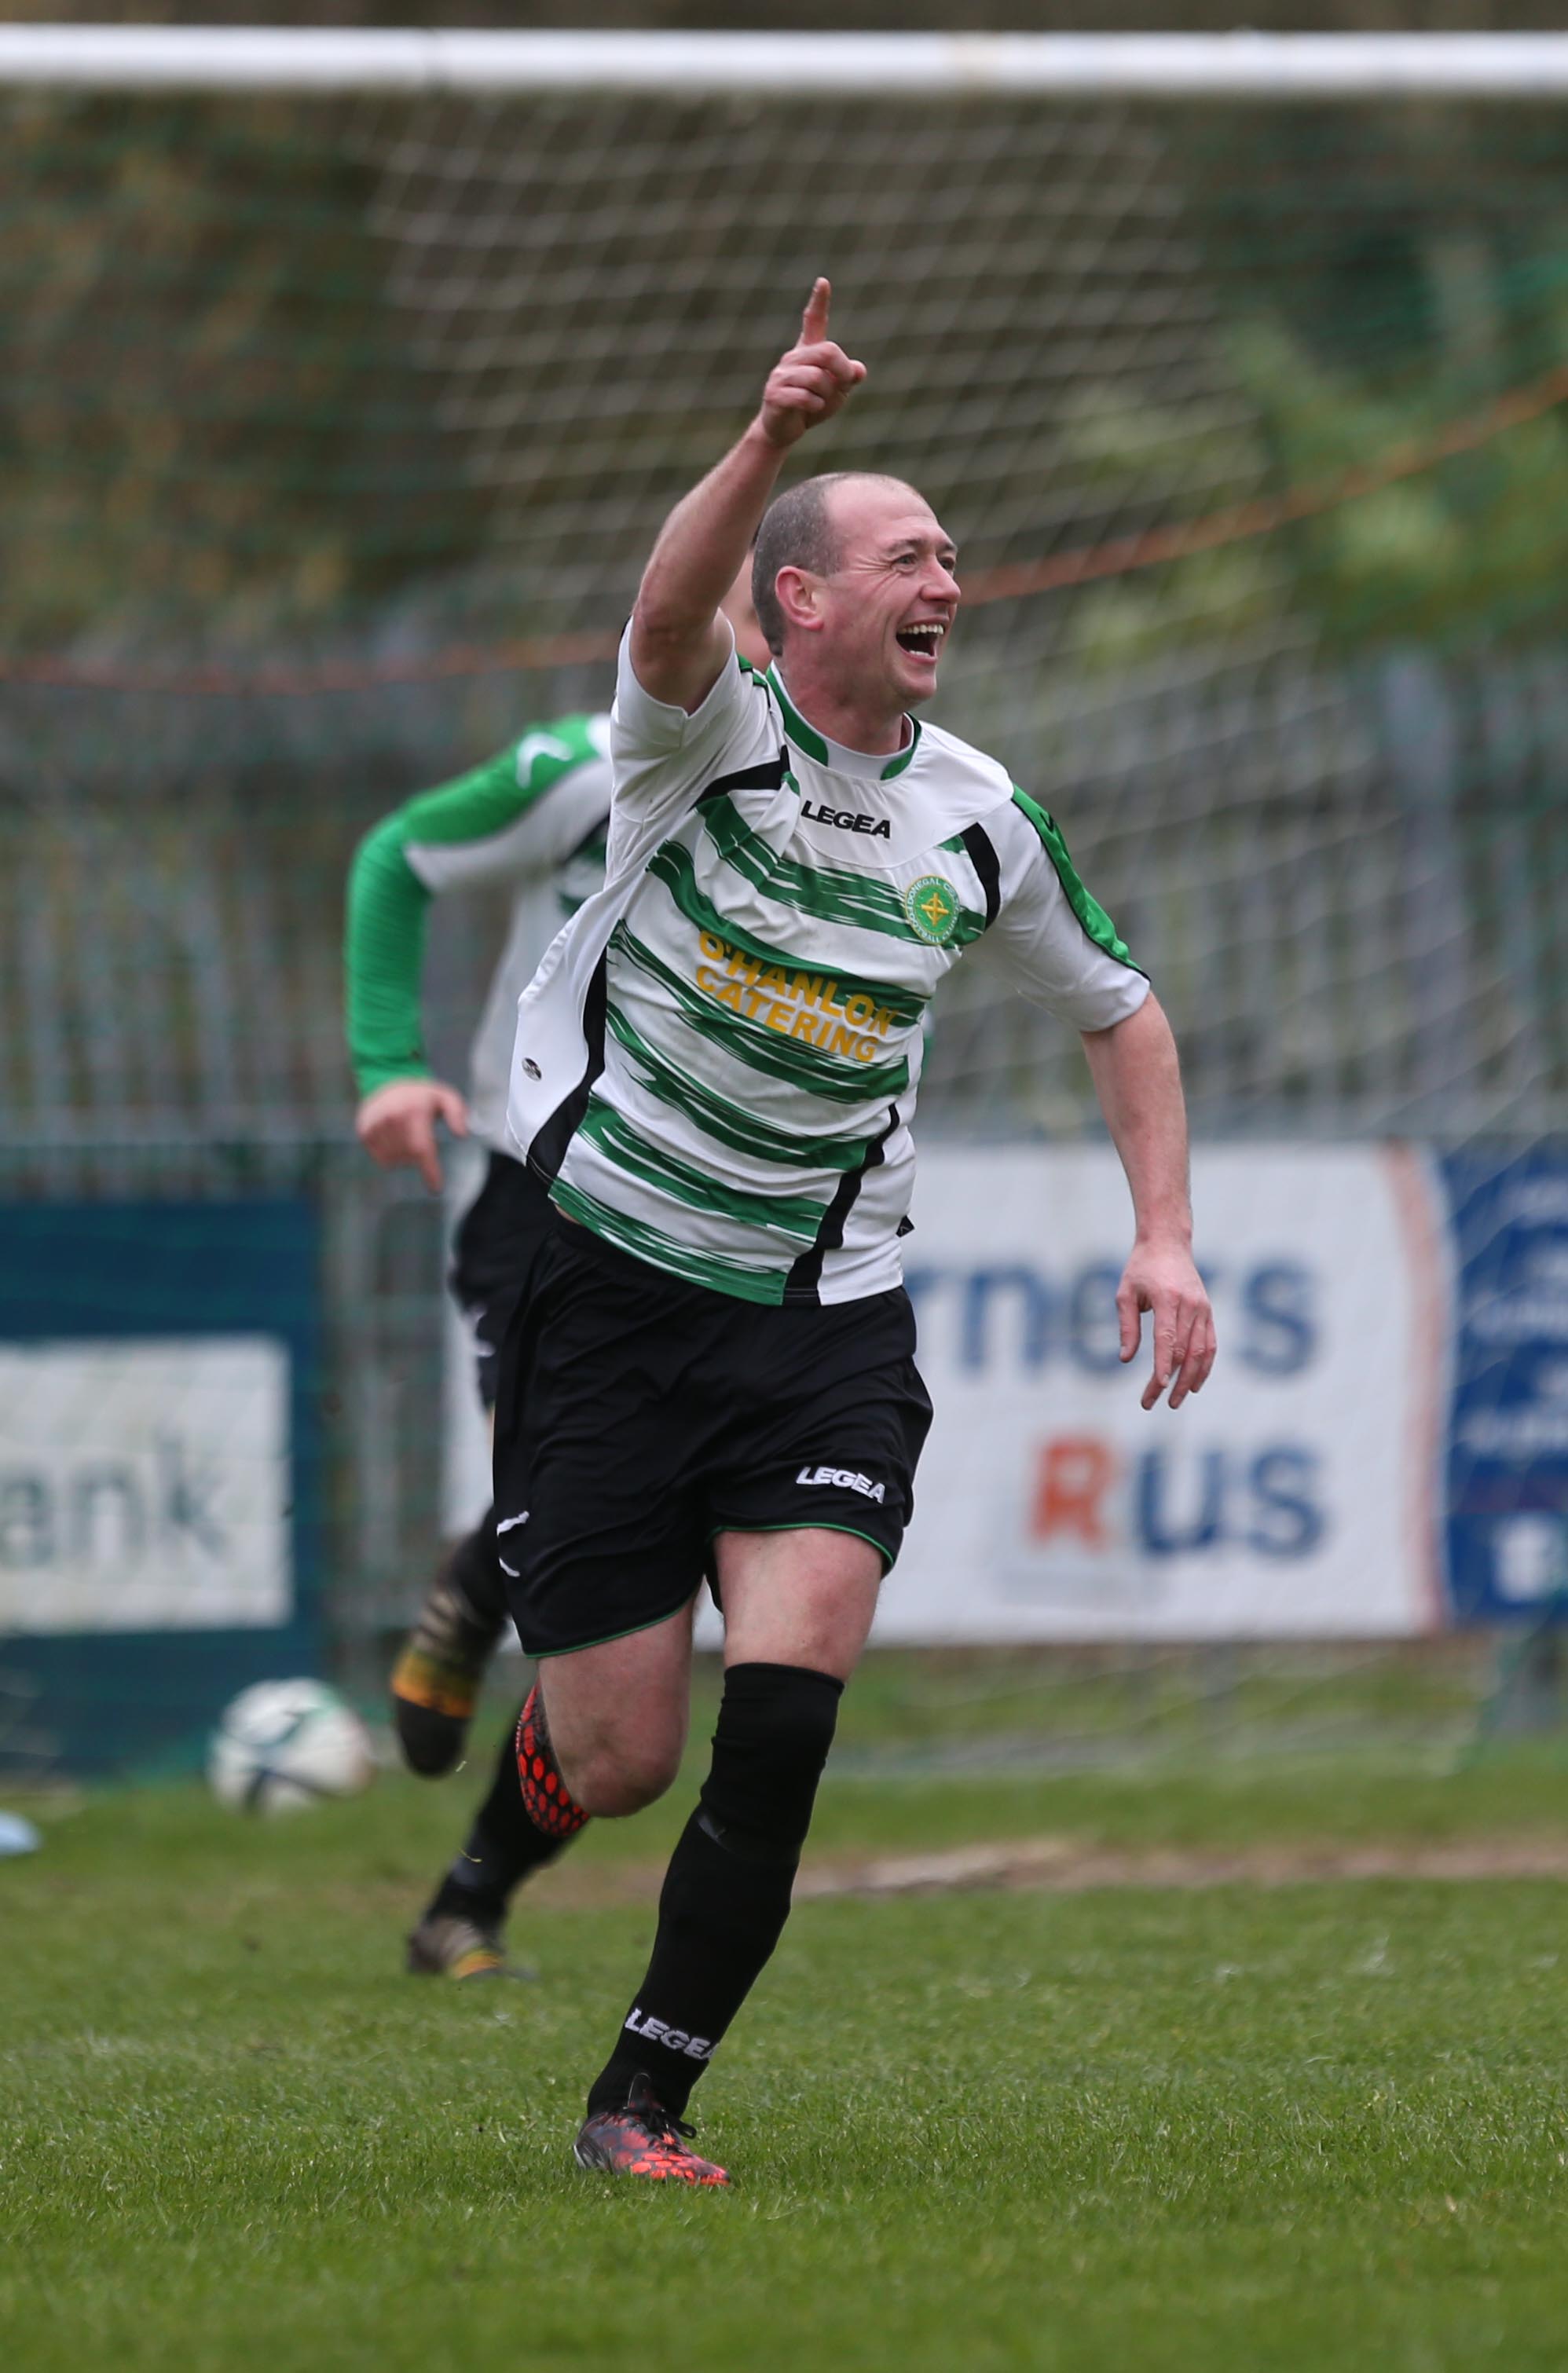 Donegal Celtic’s Paul Brown was among the scorers when the Hoops beat Sport and Leisure Swifts 5-3 in December. The West Belfast rivals meet again at Suffolk Road this Saturday 